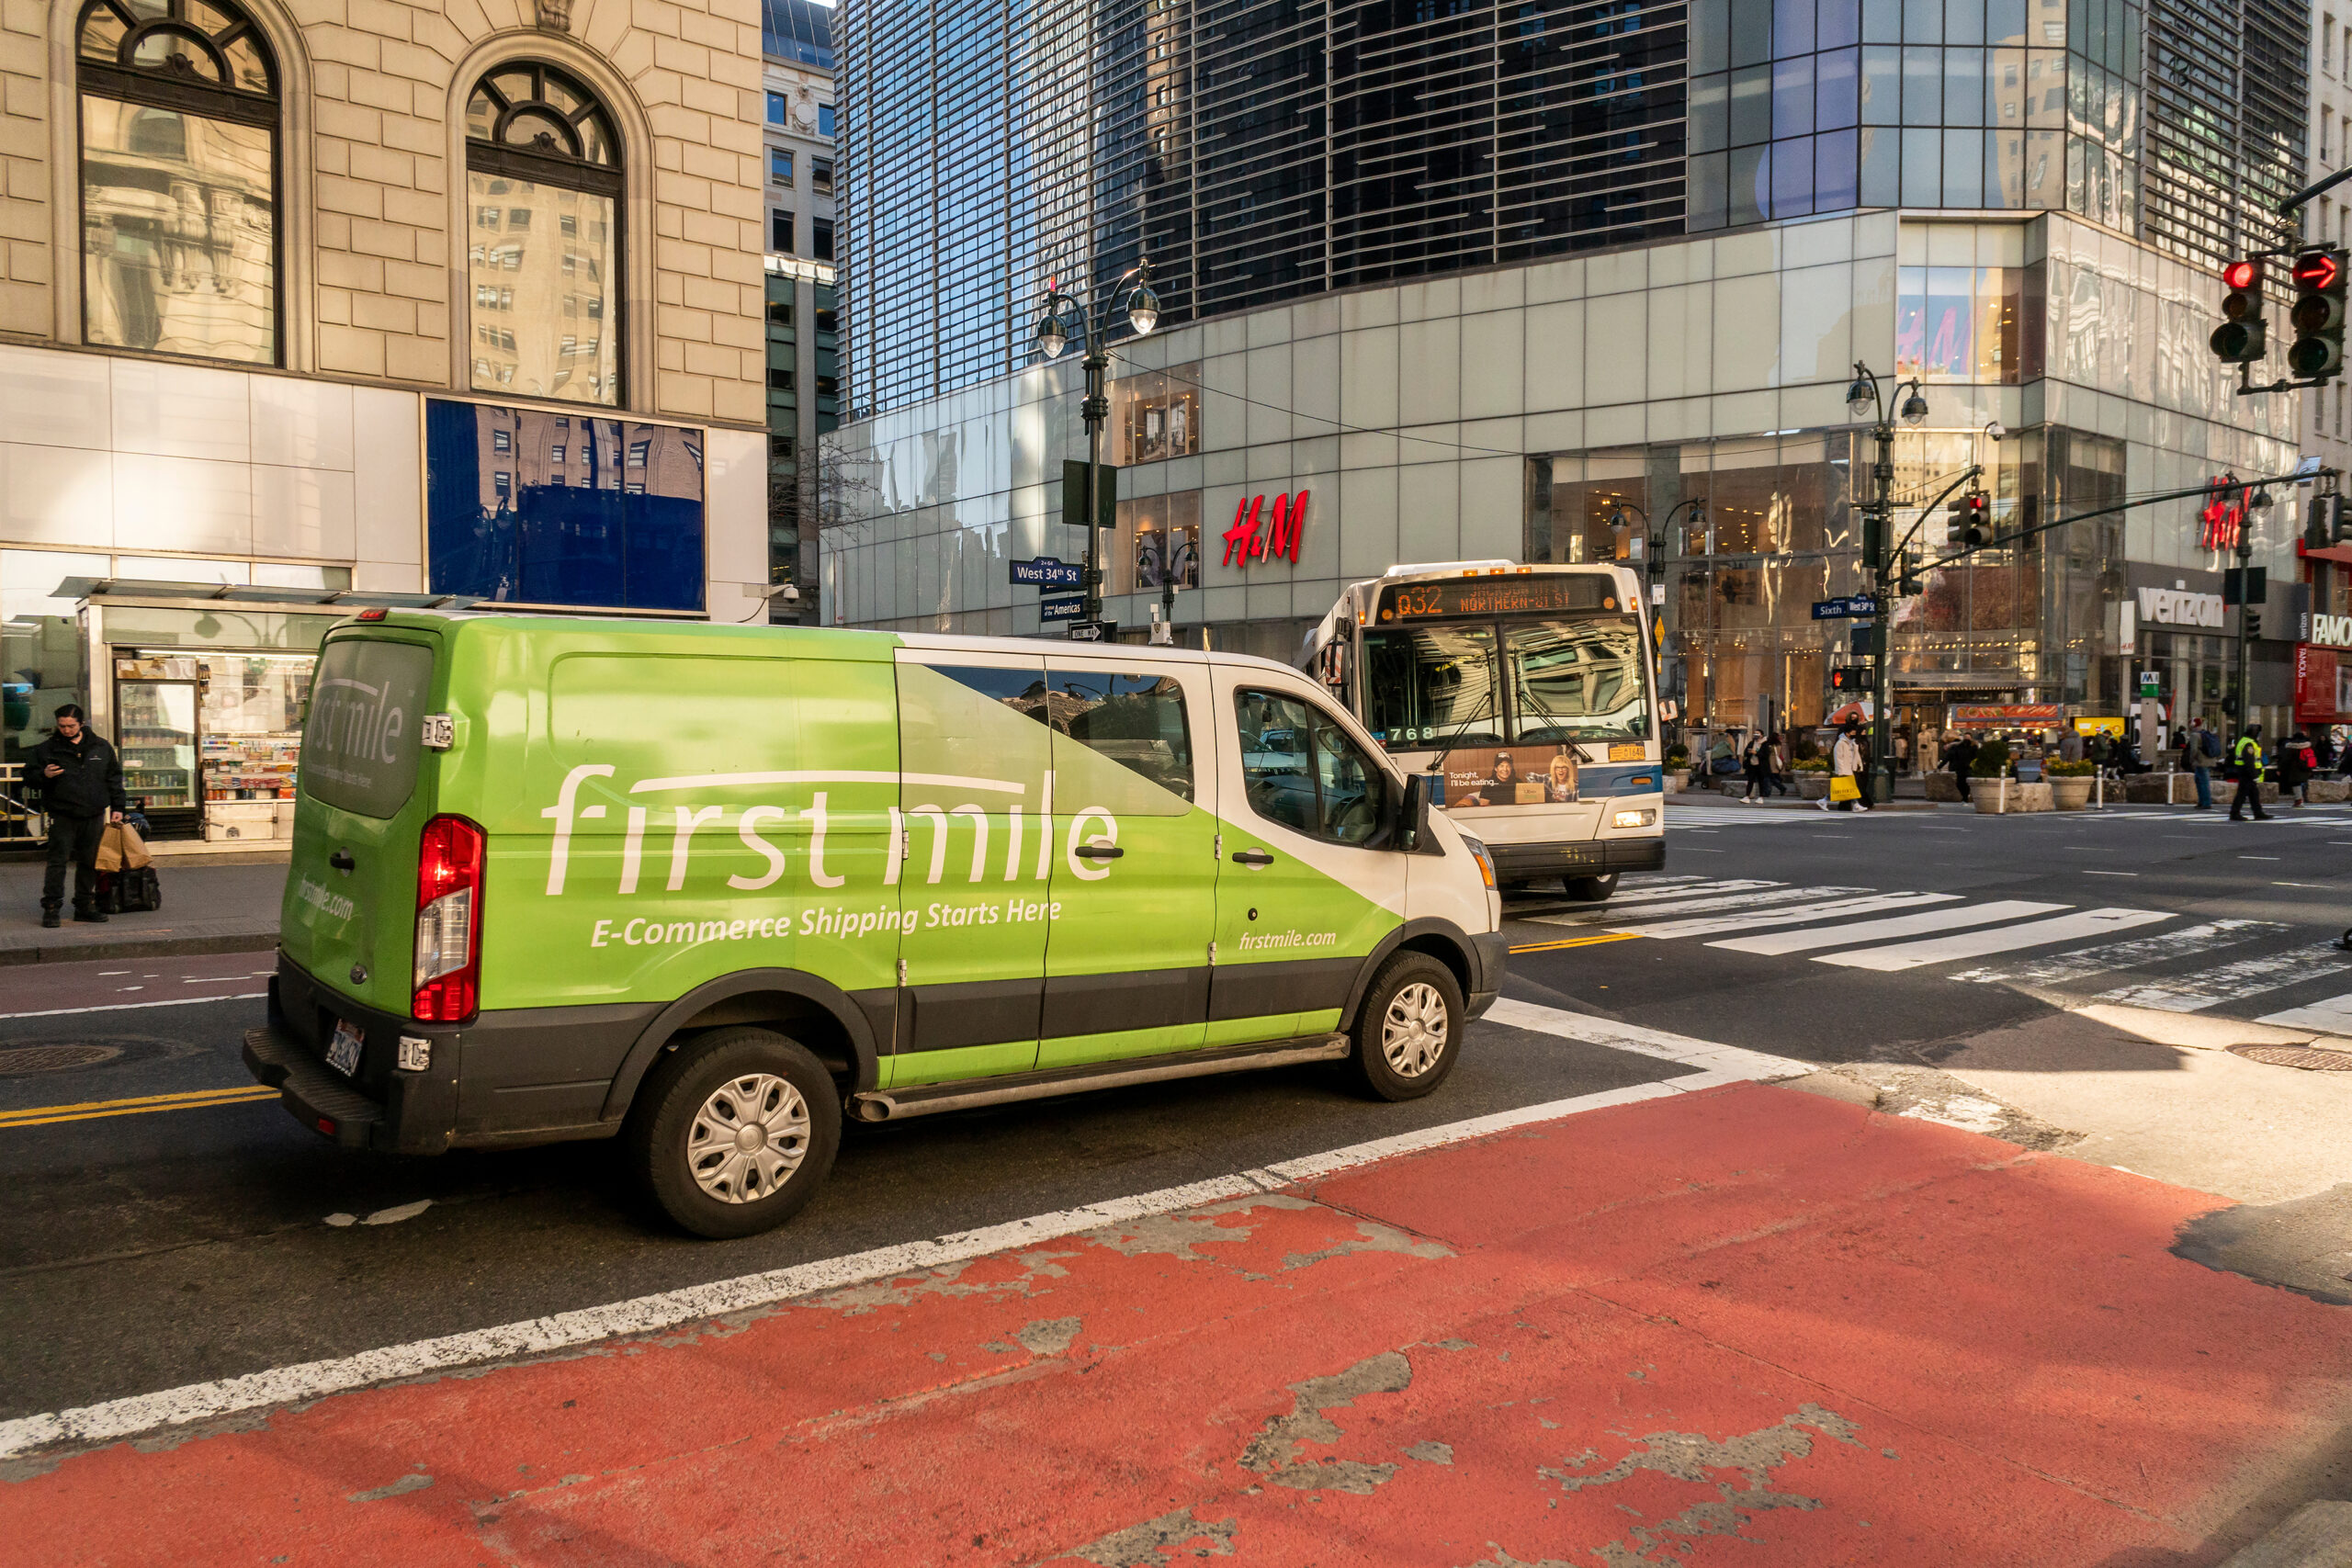 New York NY USA-March 6, 2020  A FirstMile brand delivery van in Herald Square in New York